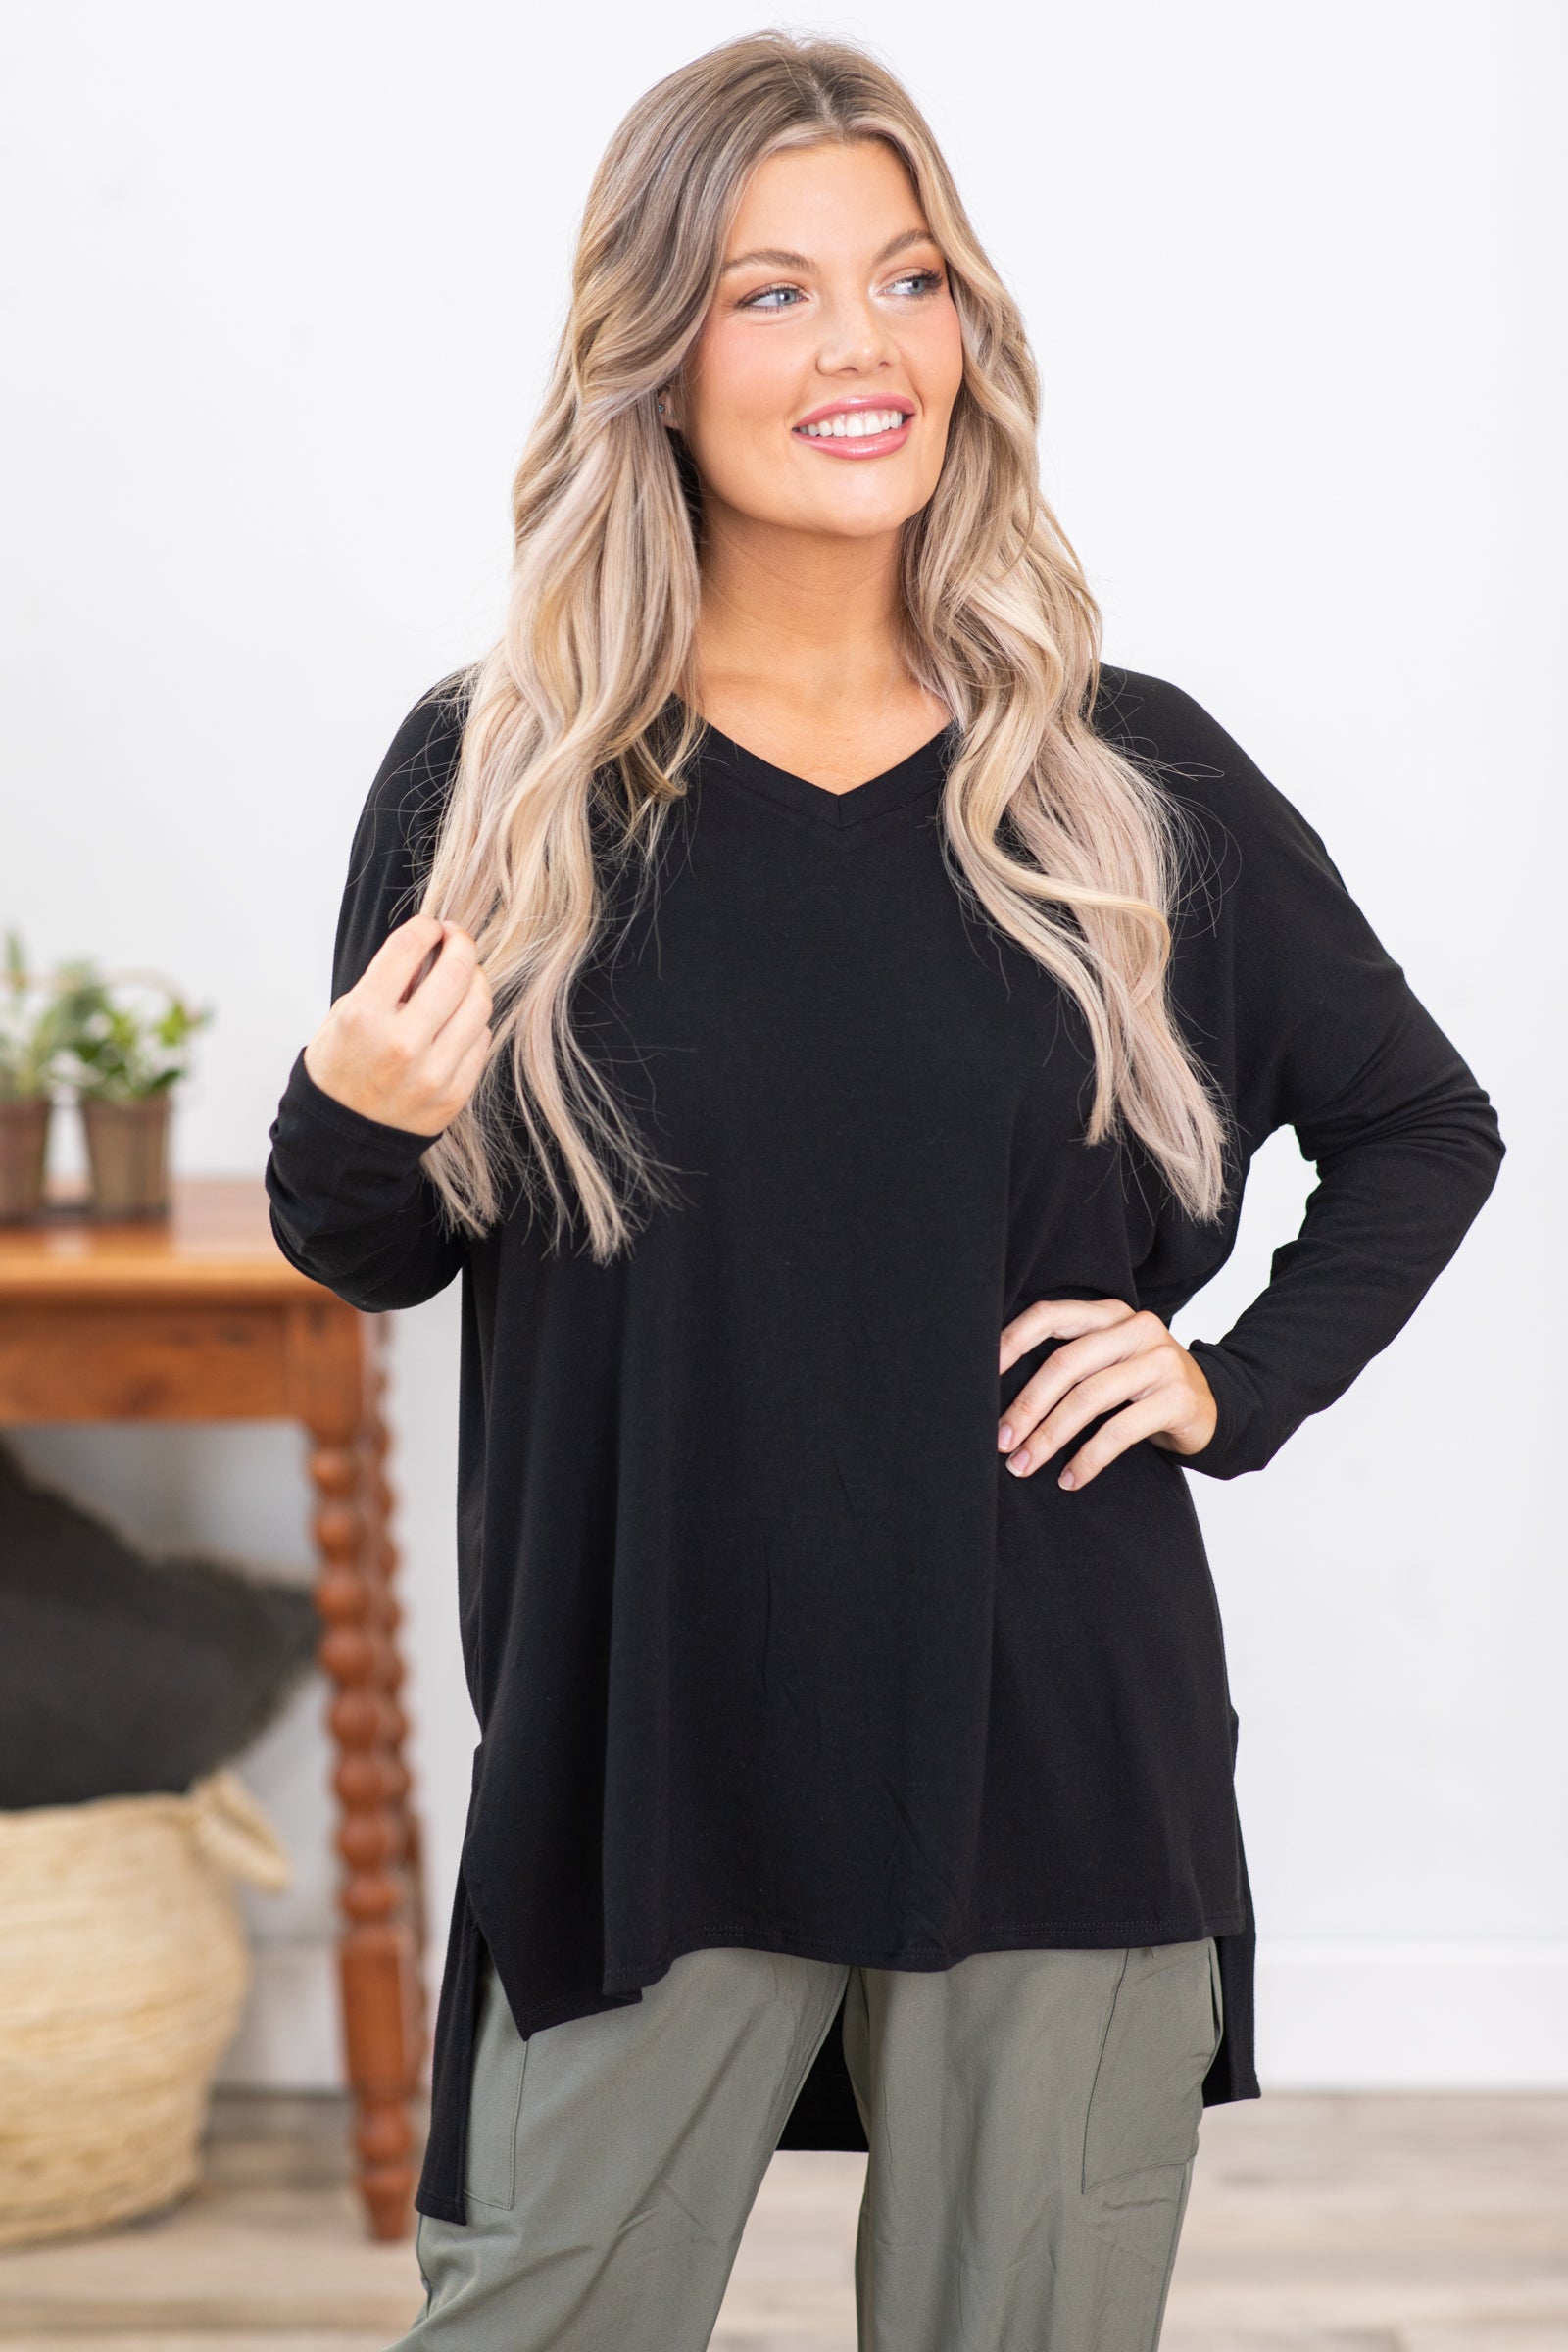 Black Long Sleeve Top With Side Slits